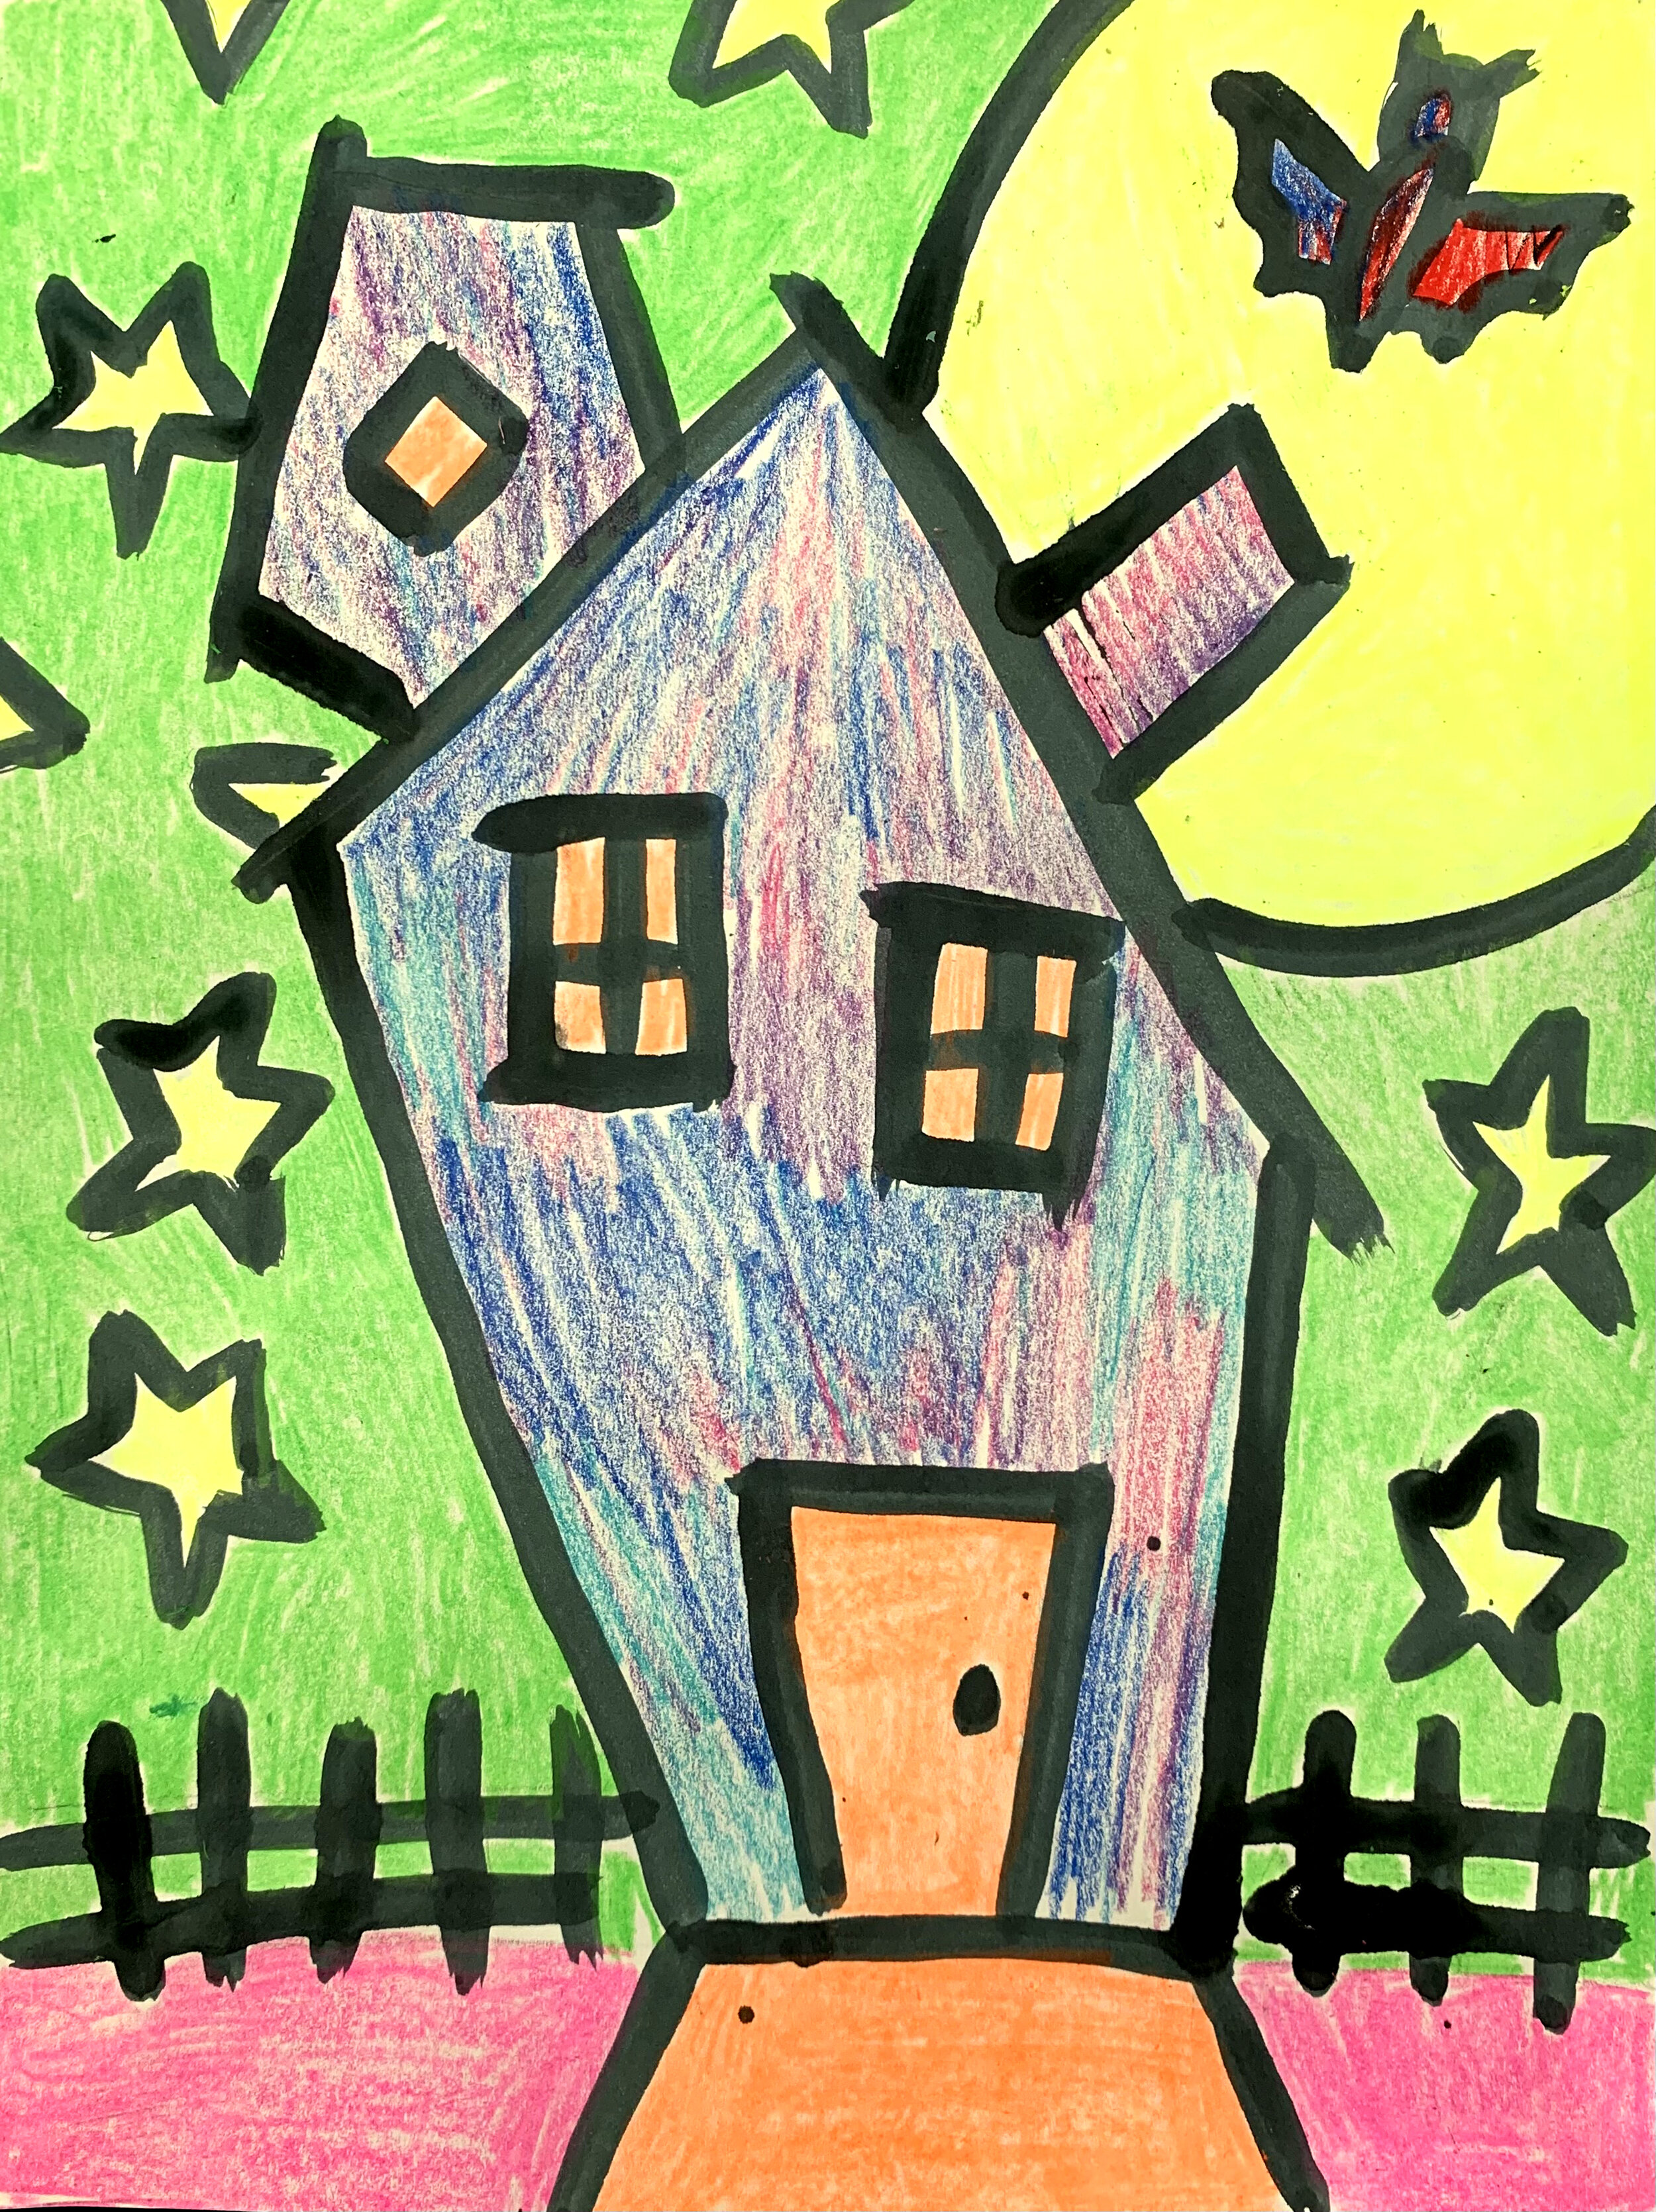 Oil Pastel Haunted House Craft For Kids  Kids art projects, Halloween arts  and crafts, Halloween art projects